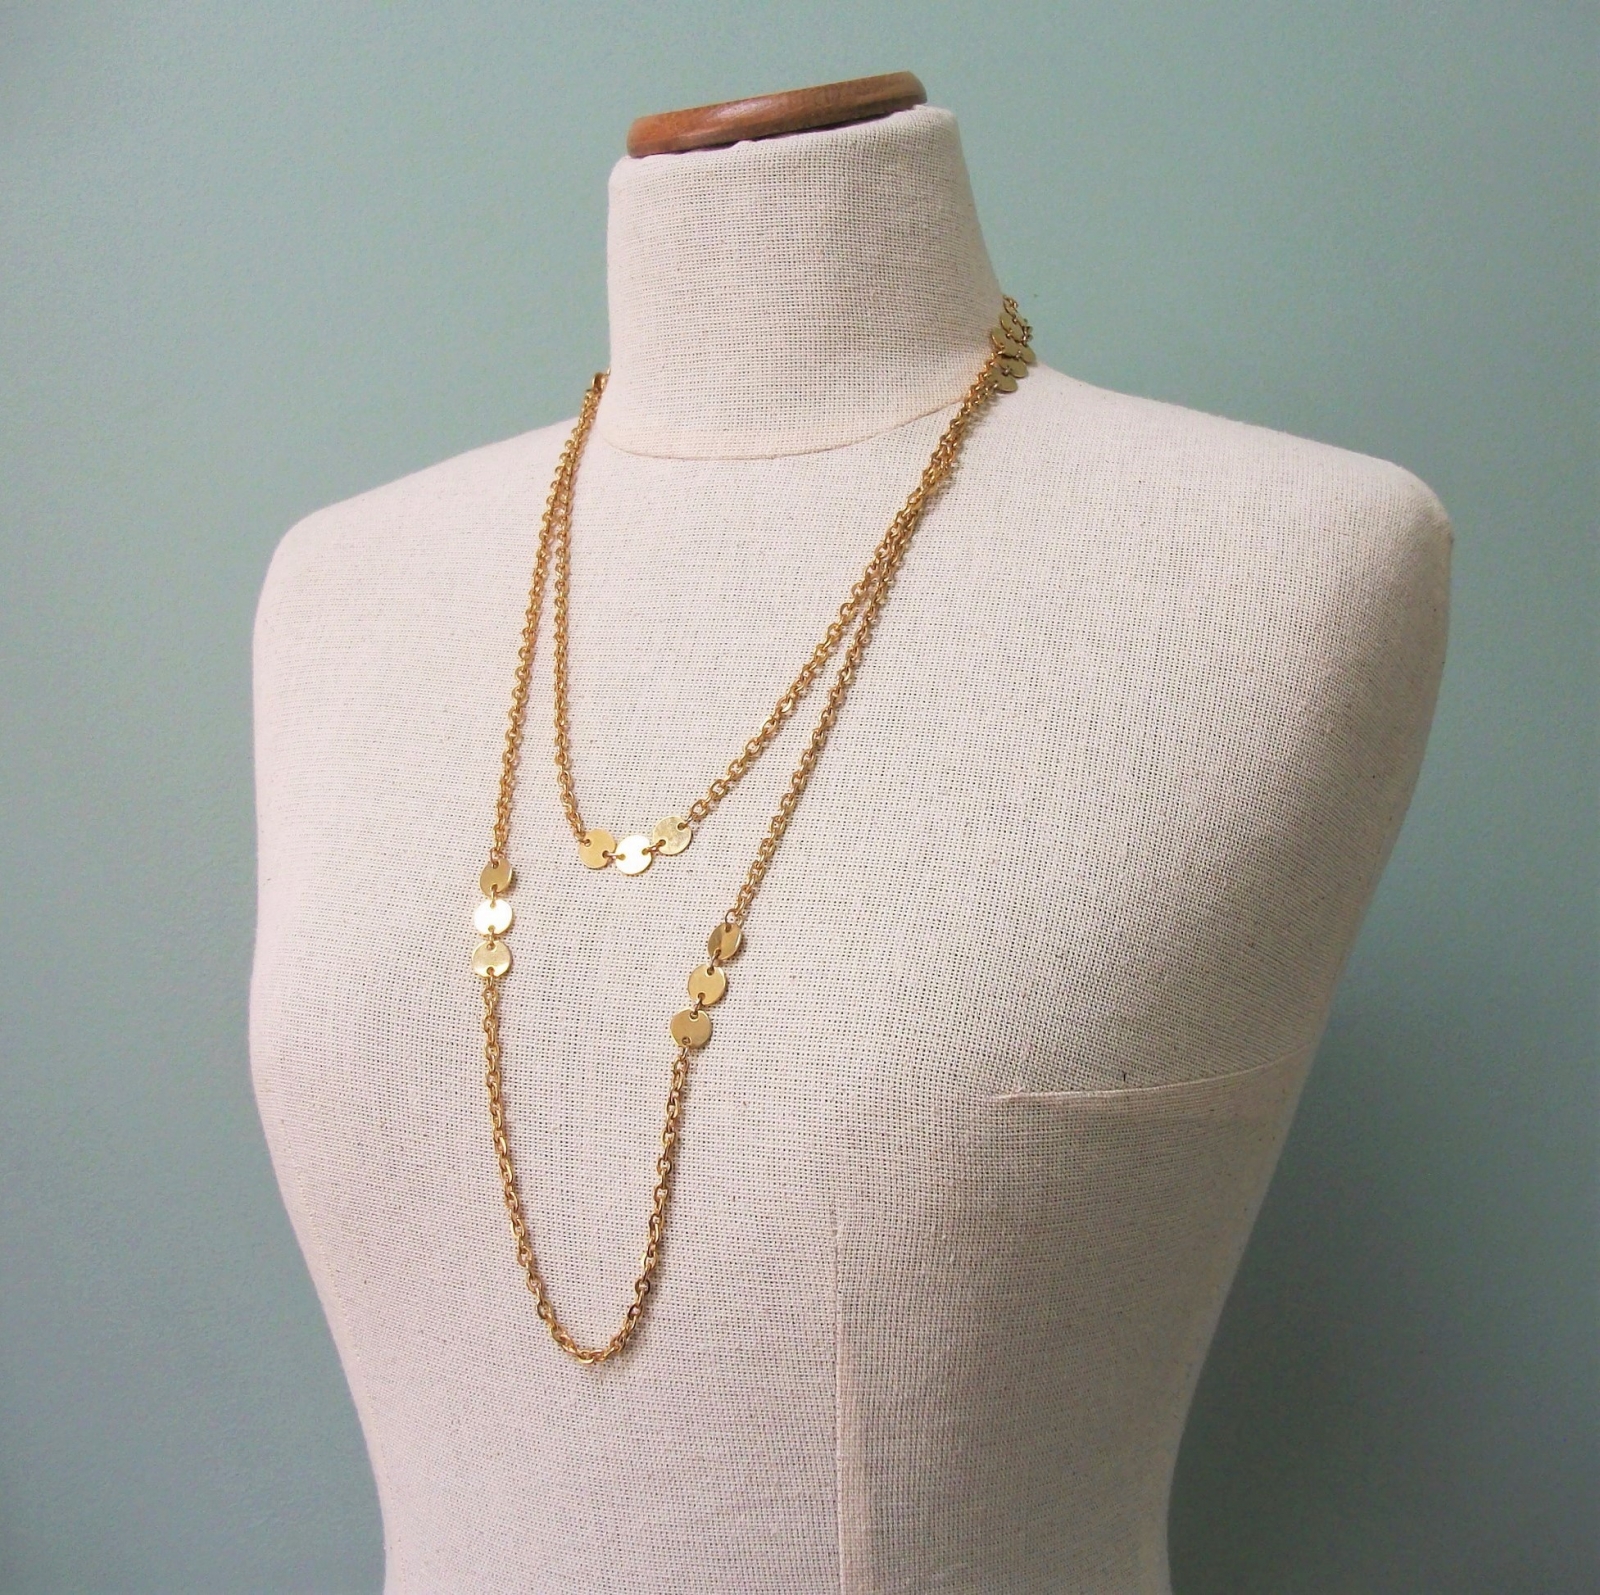 Vintage Long Gold Tone Chain Necklace Small Round Gold Circle Accents